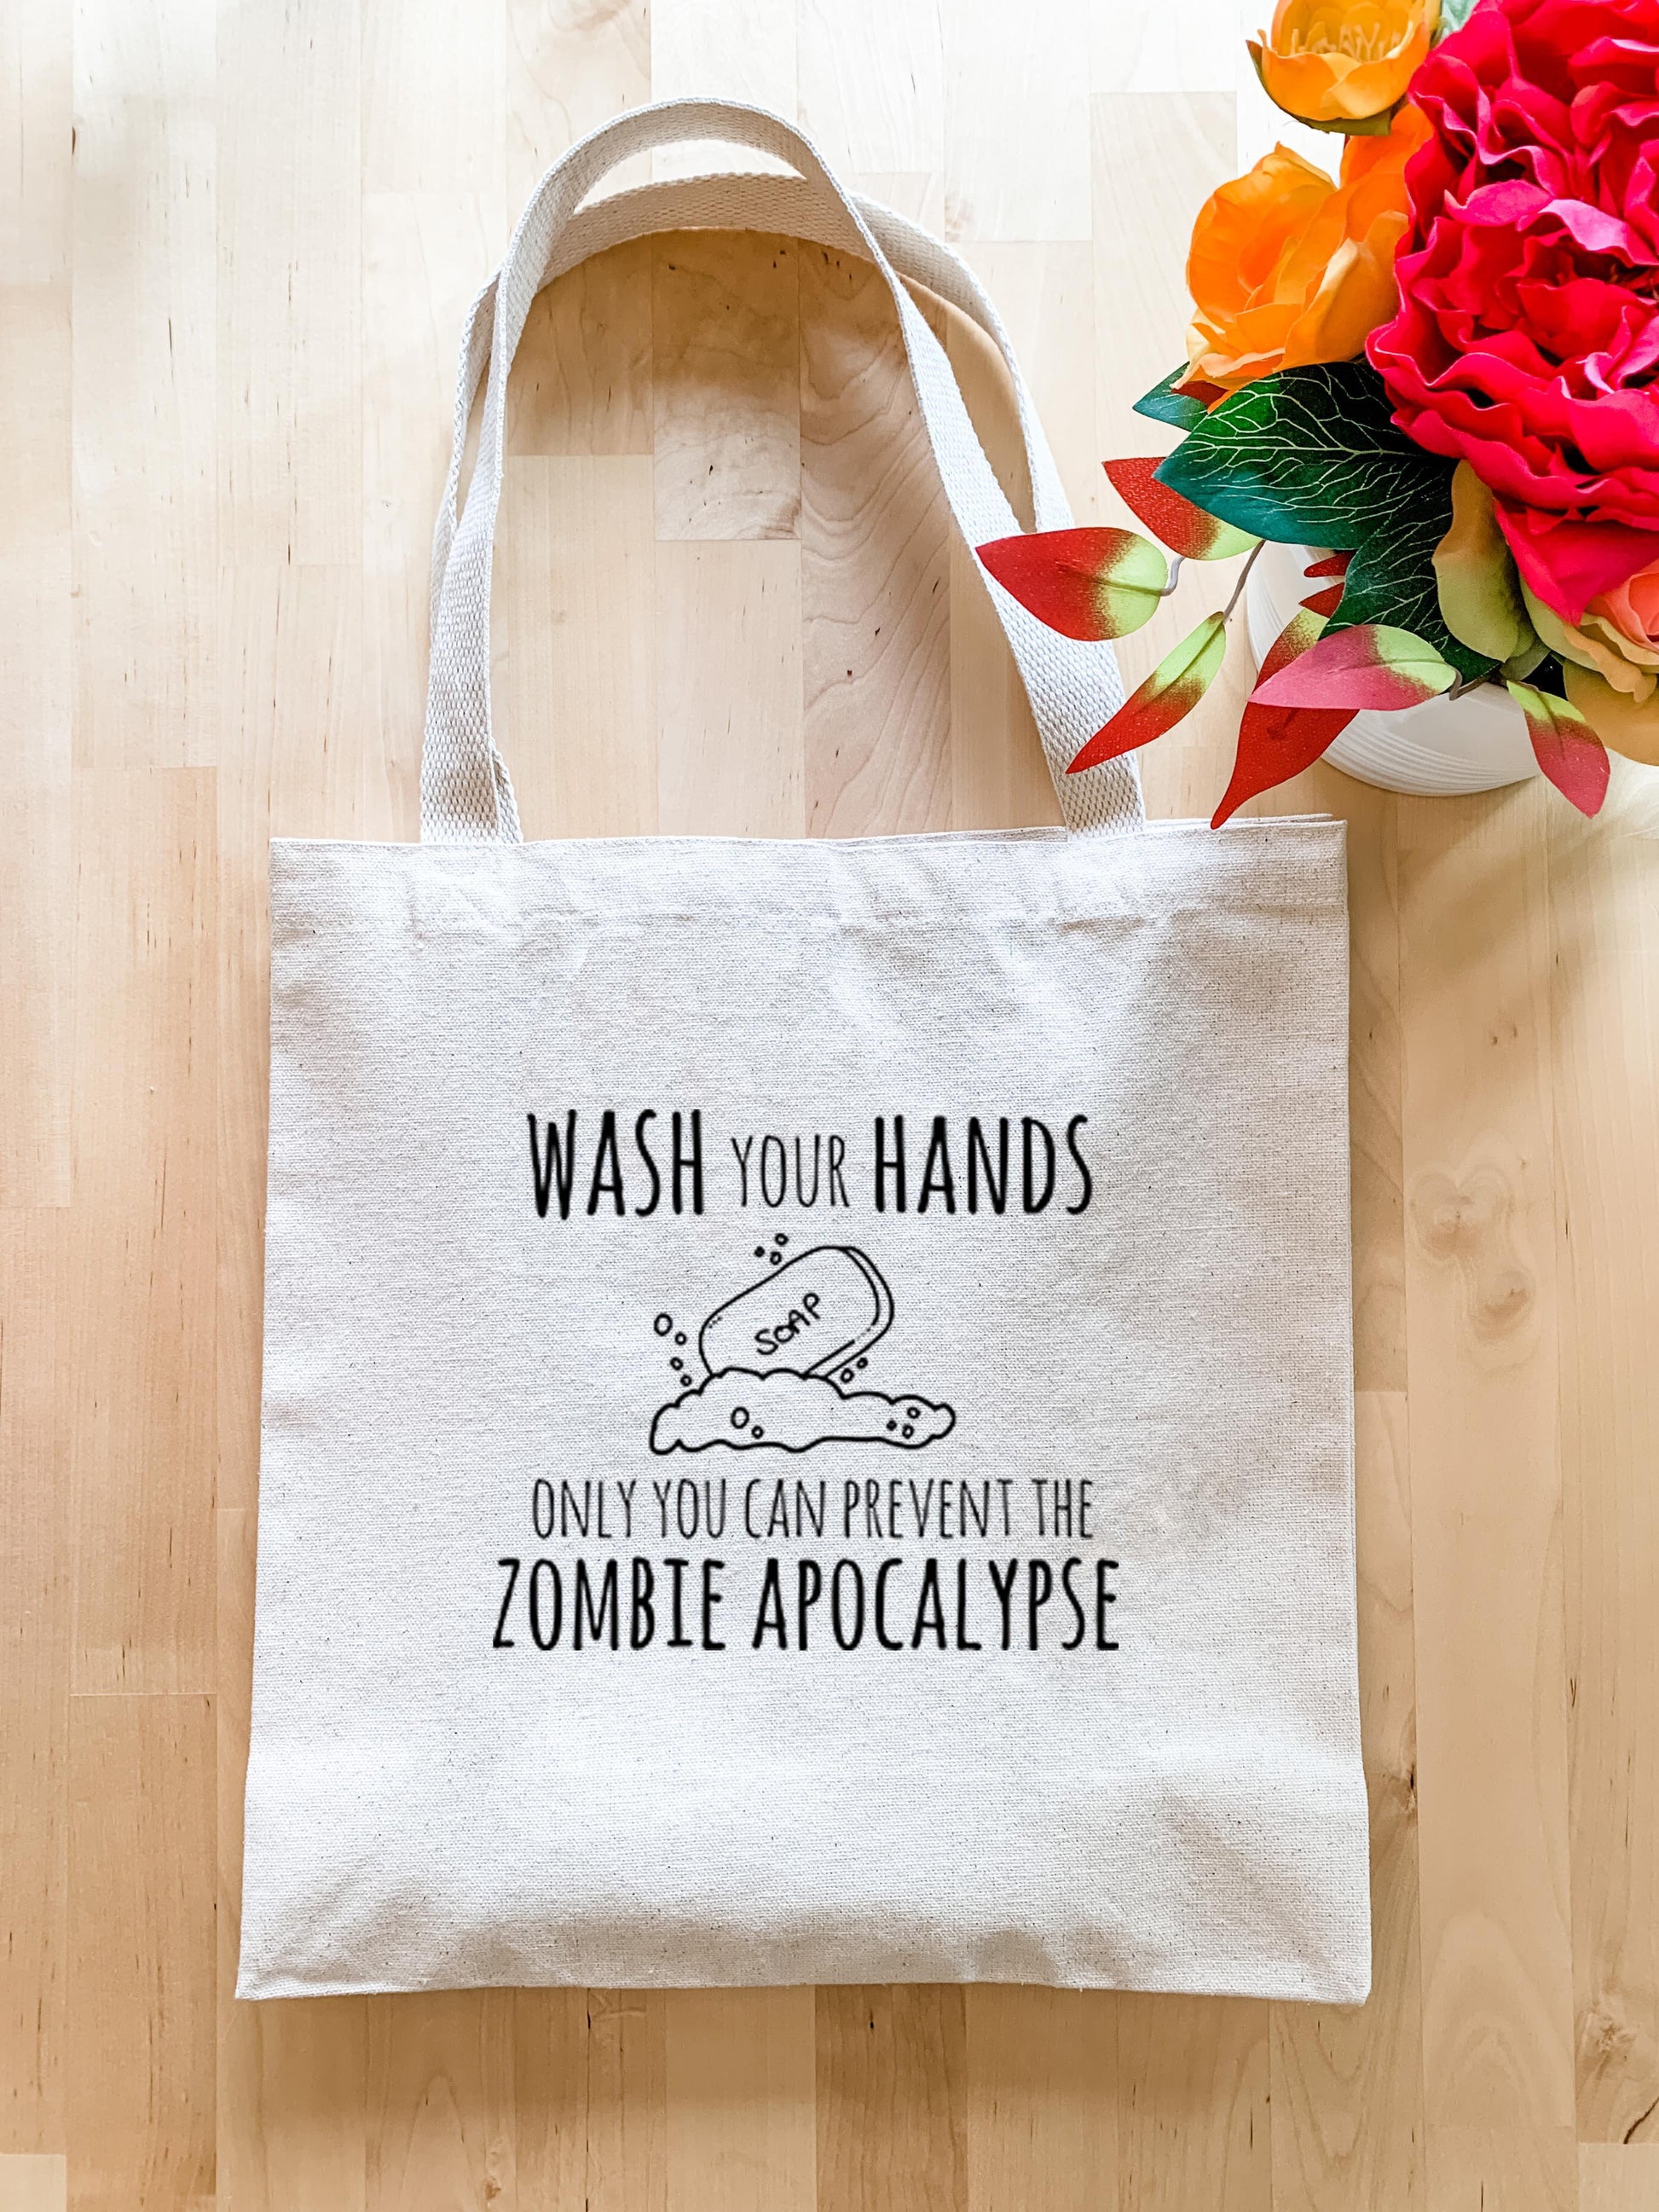 Wash Your Hands, Only You Can Prevent The Zombie Apocalypse - Tote Bag - MoonlightMakers